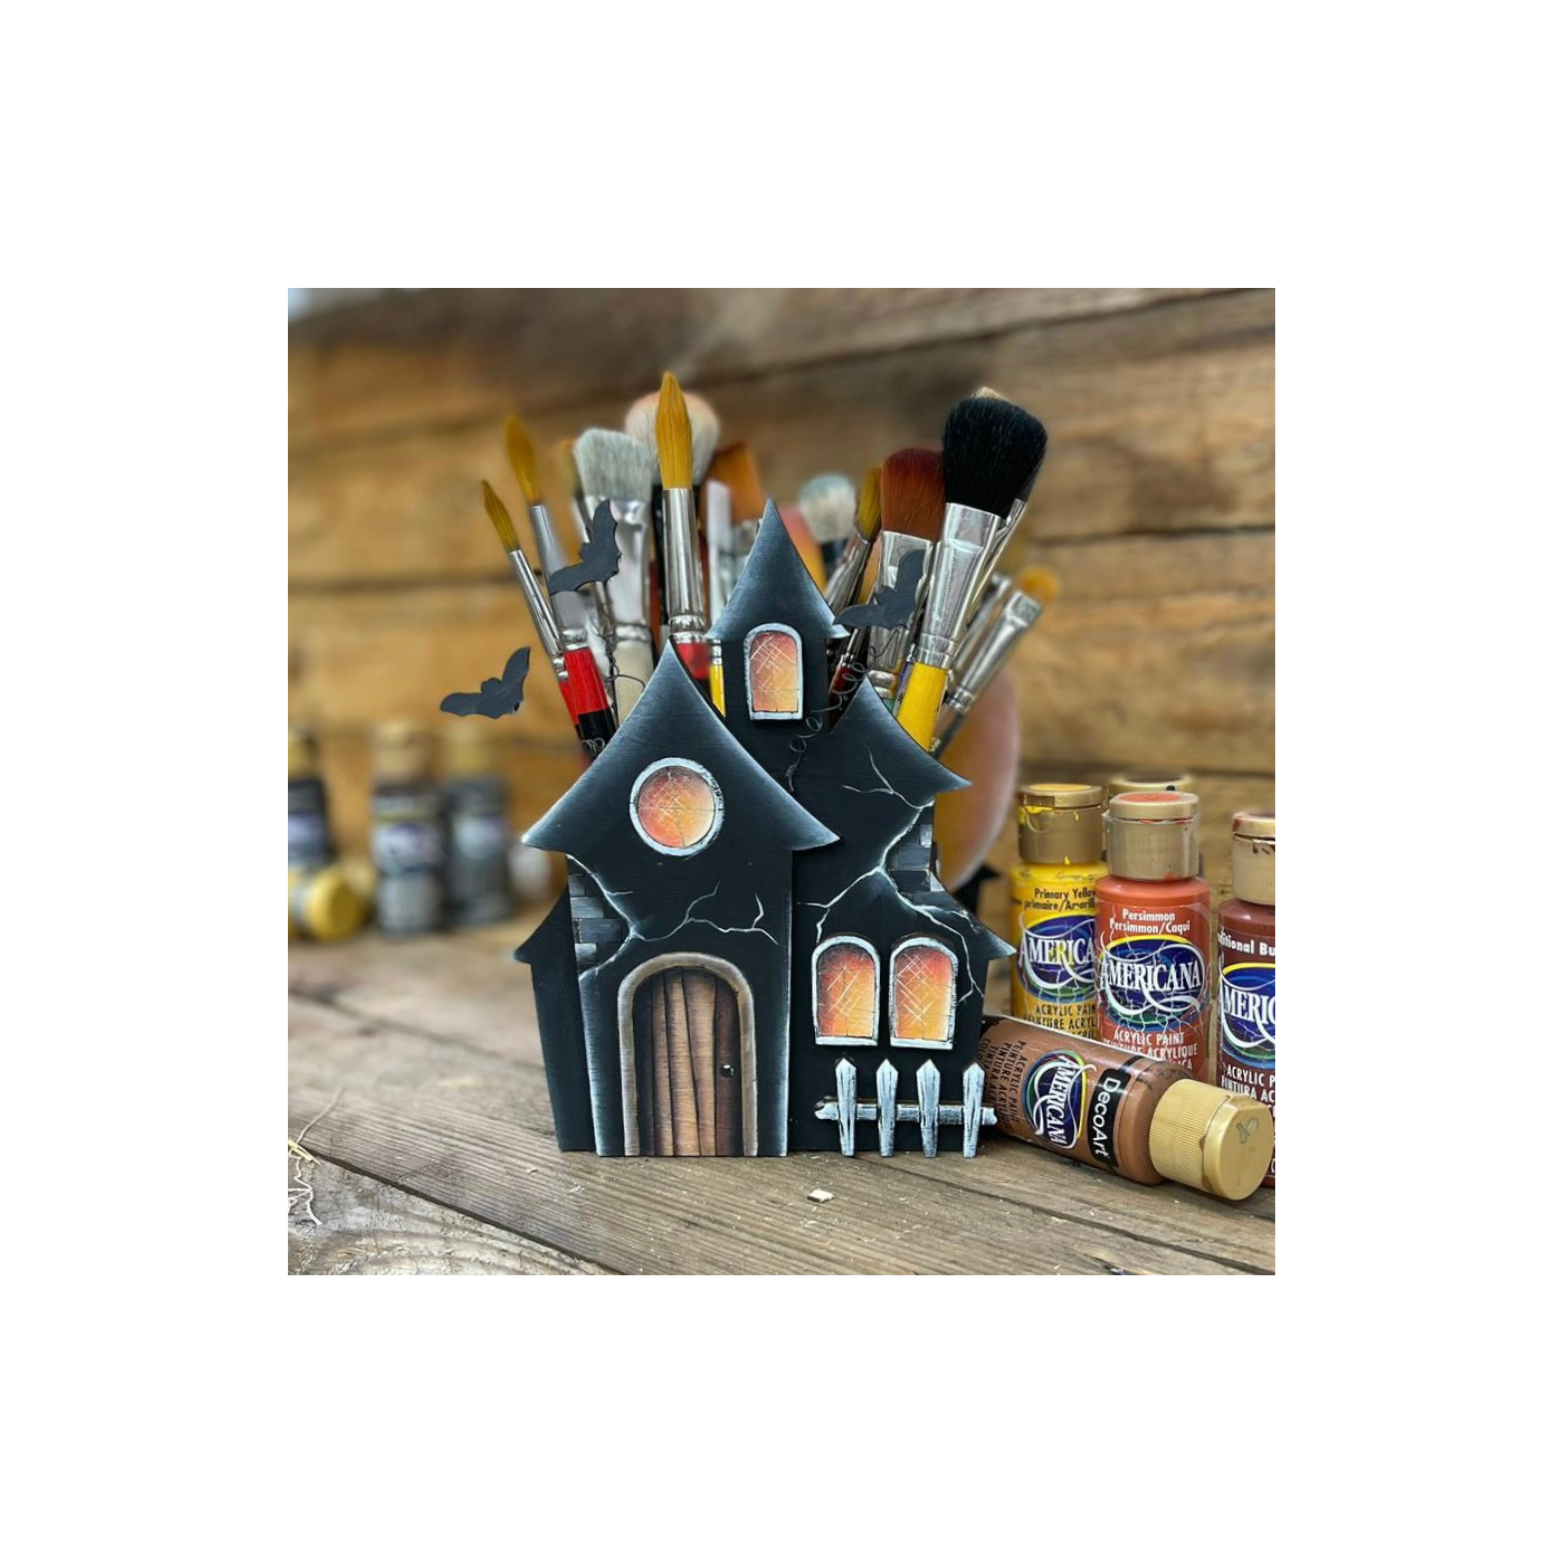 Portapennelli/ brush holder “I love Halloween” Out of the Wood